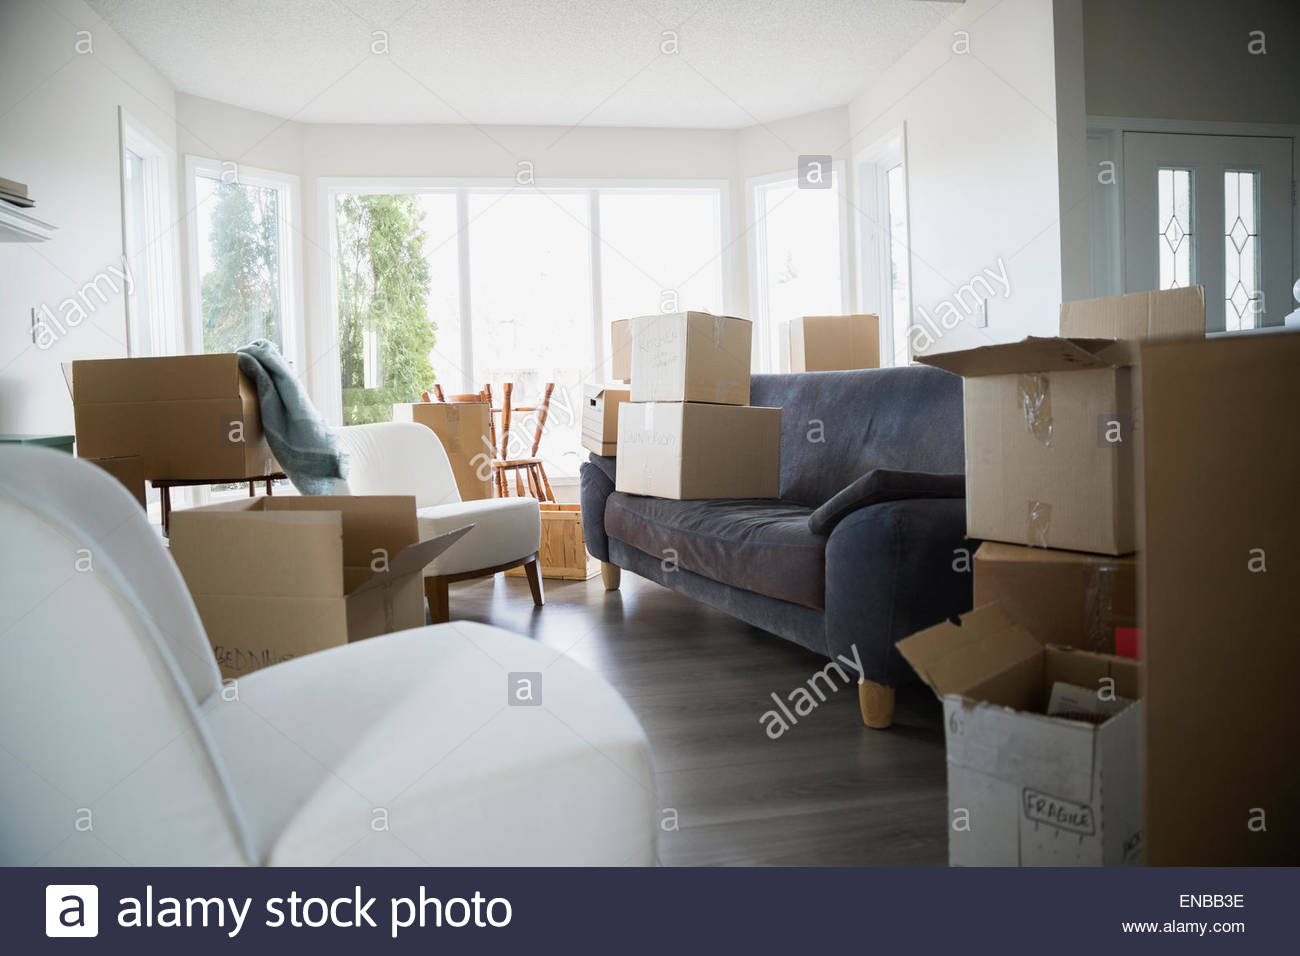 Moving boxes and furniture in living room Stock Photo